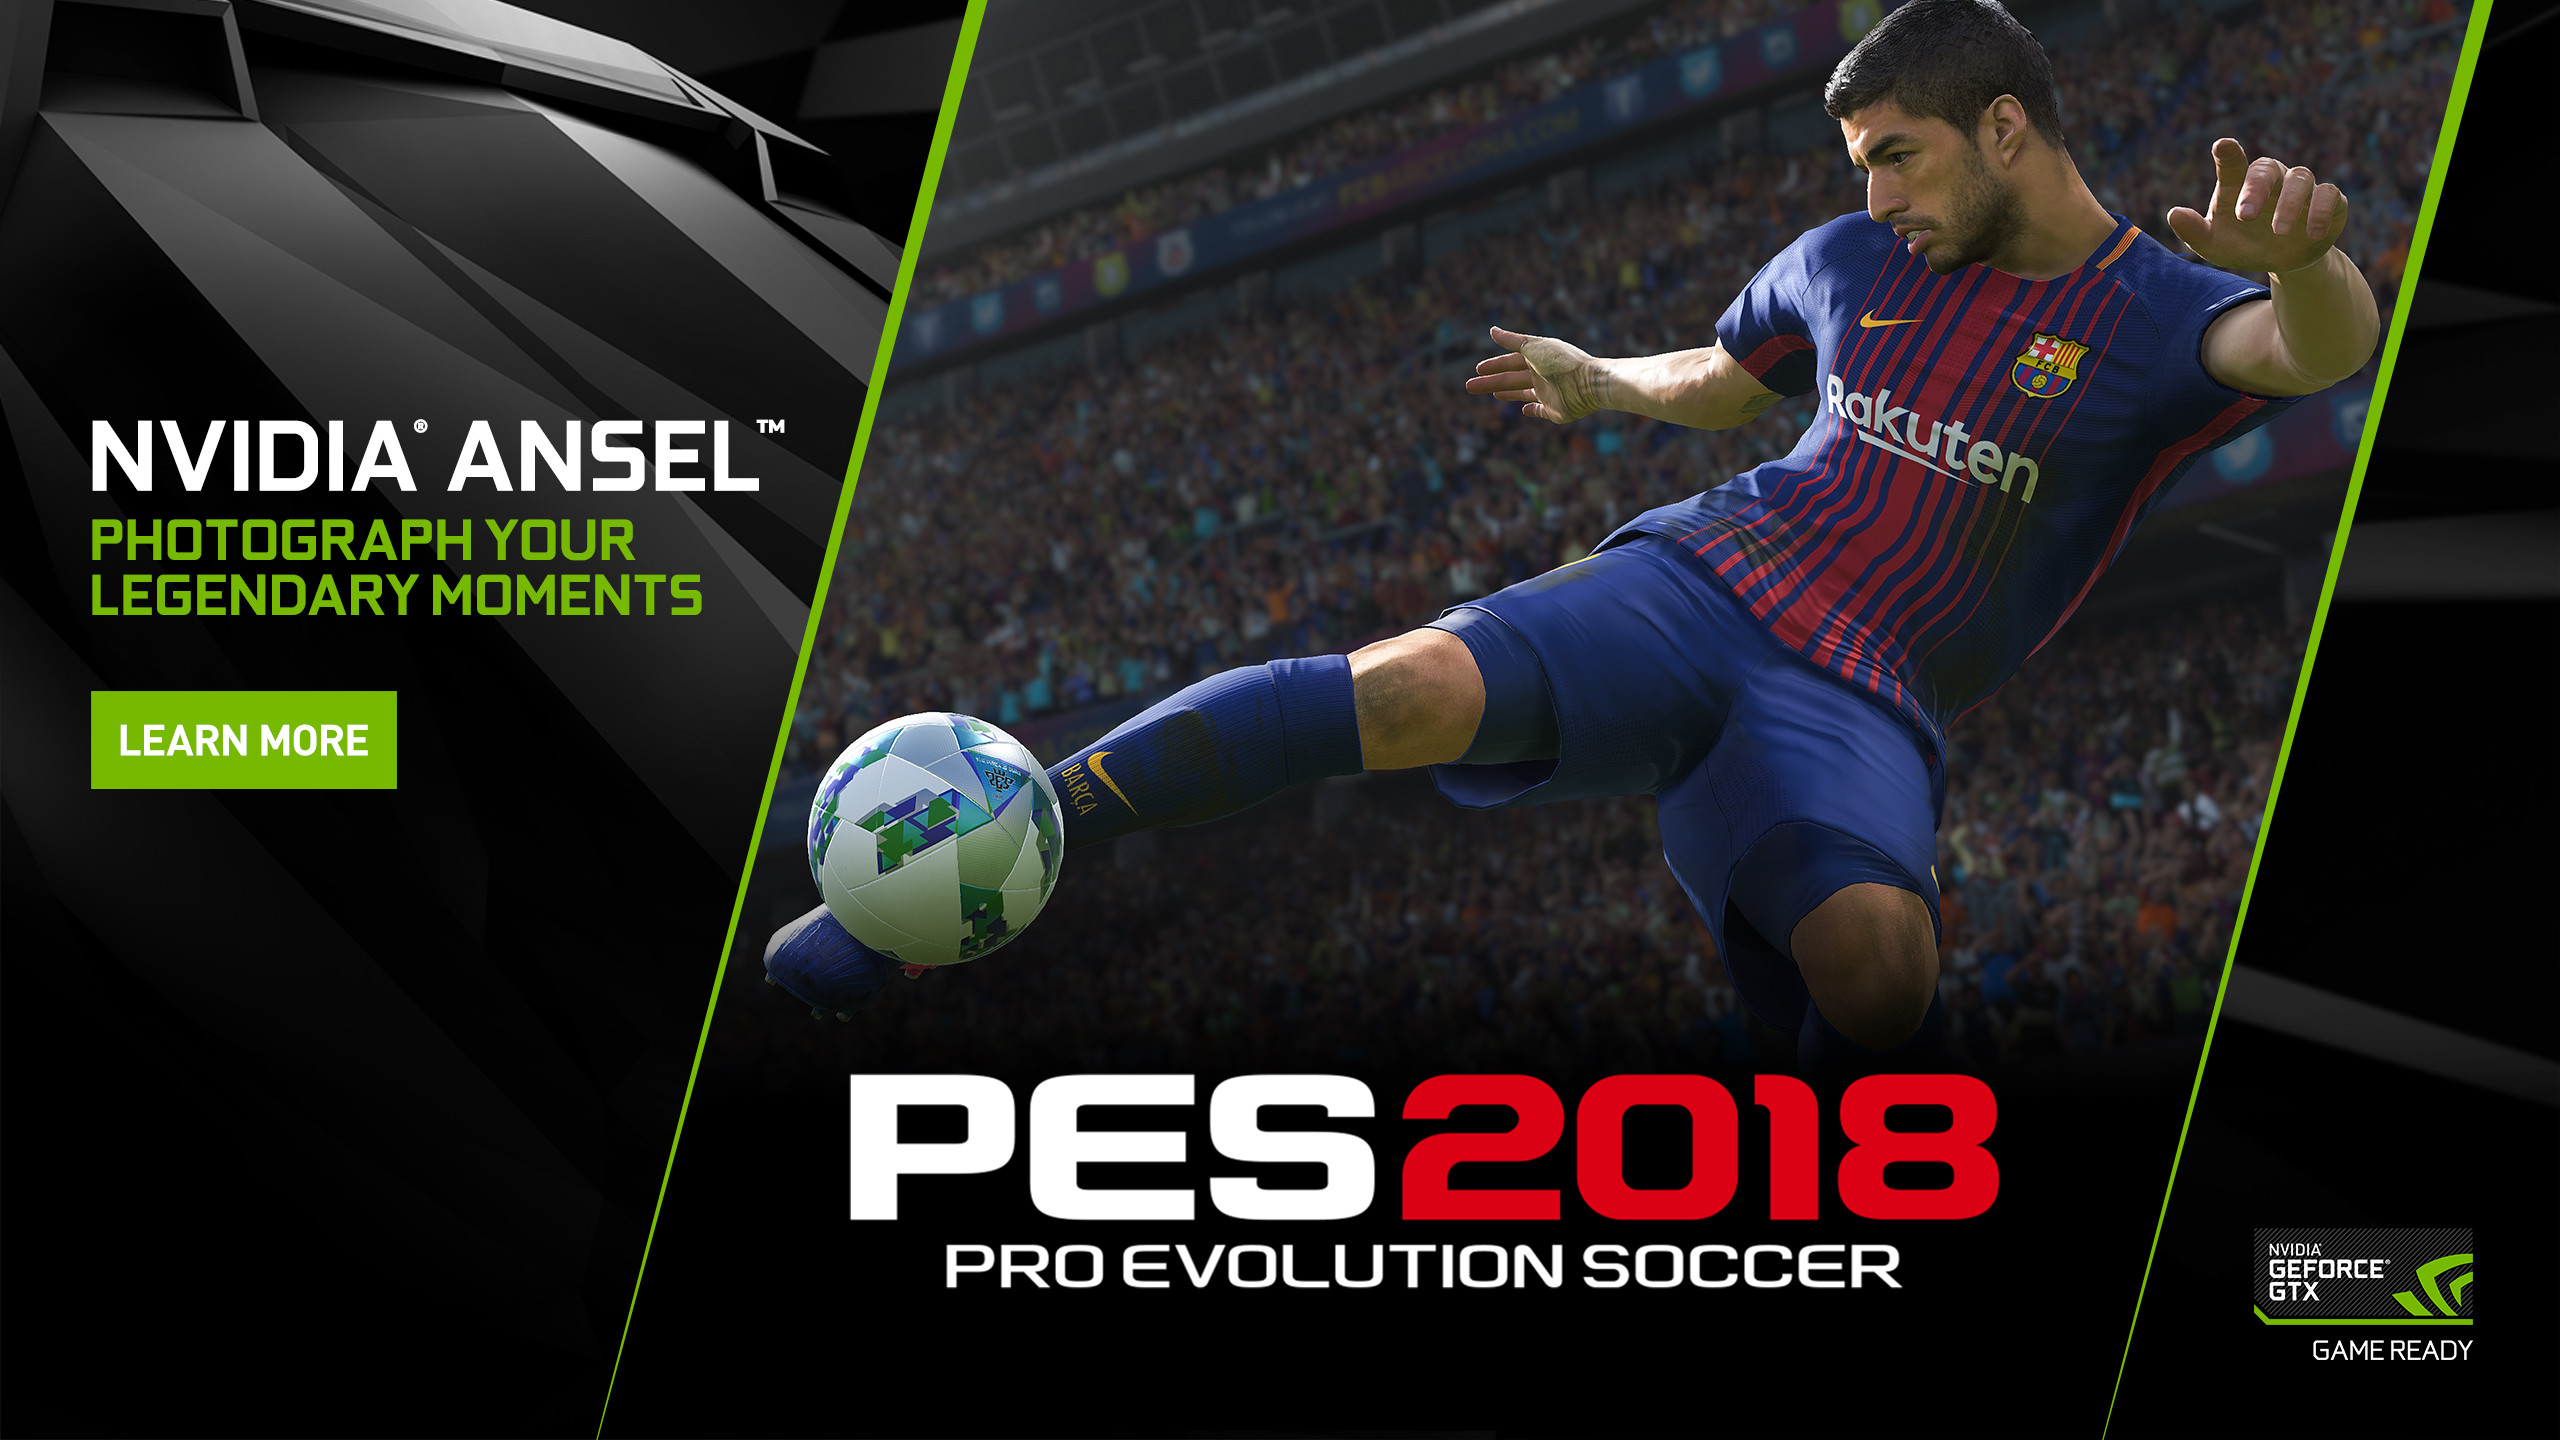 2560x1440 Pro Evolution Soccer 2018 on PC: Capture The Beautiful Game From Any Angle  With NVIDIA